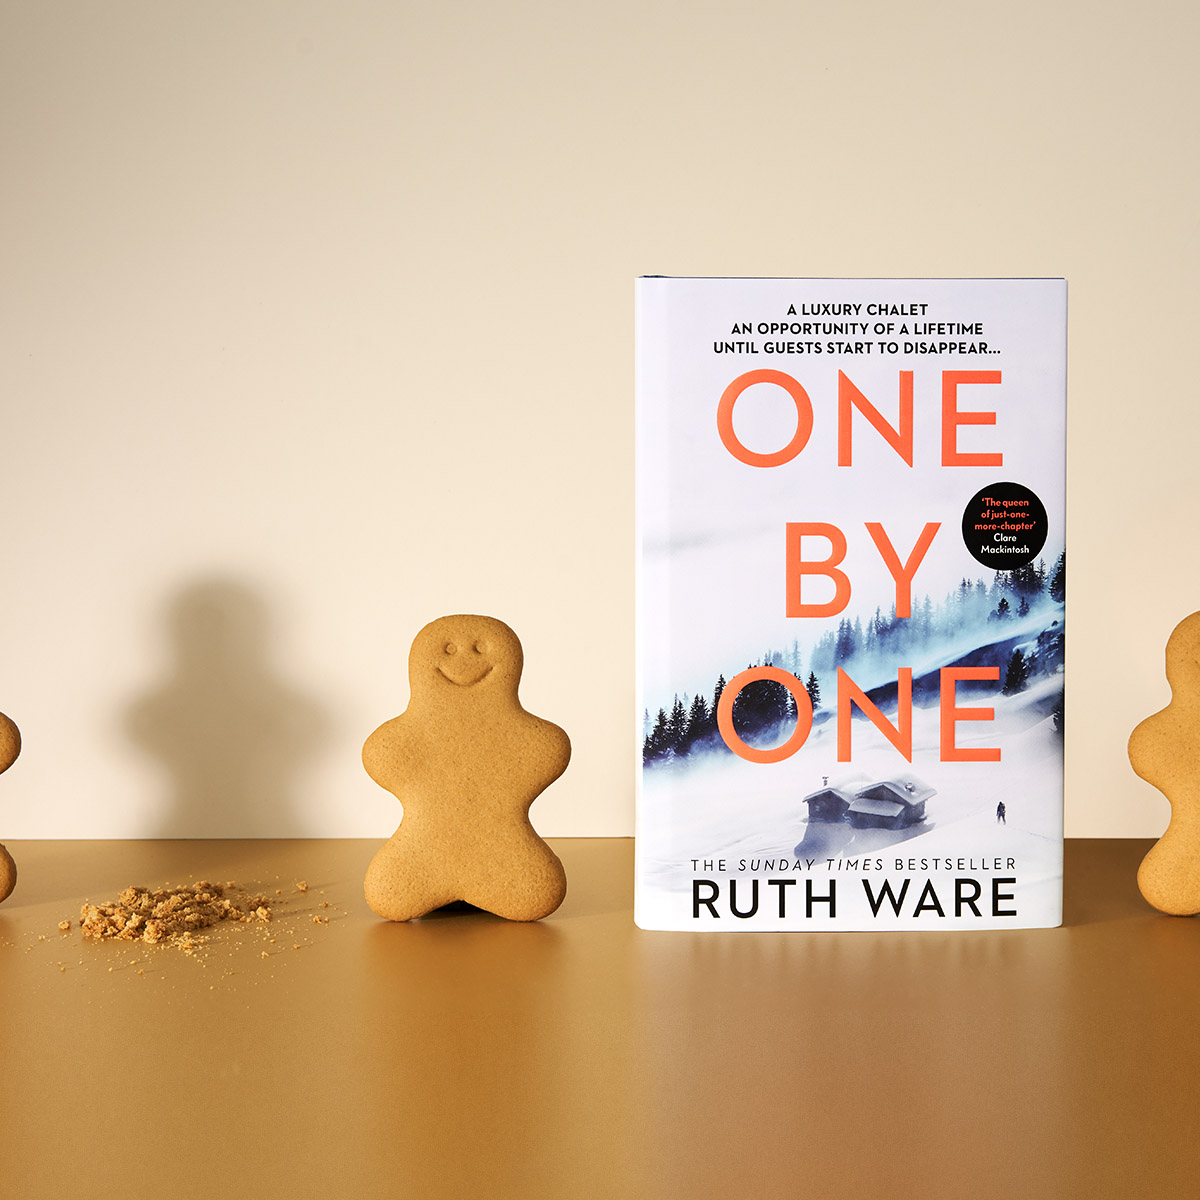 Image of One by One by Ruth Ware